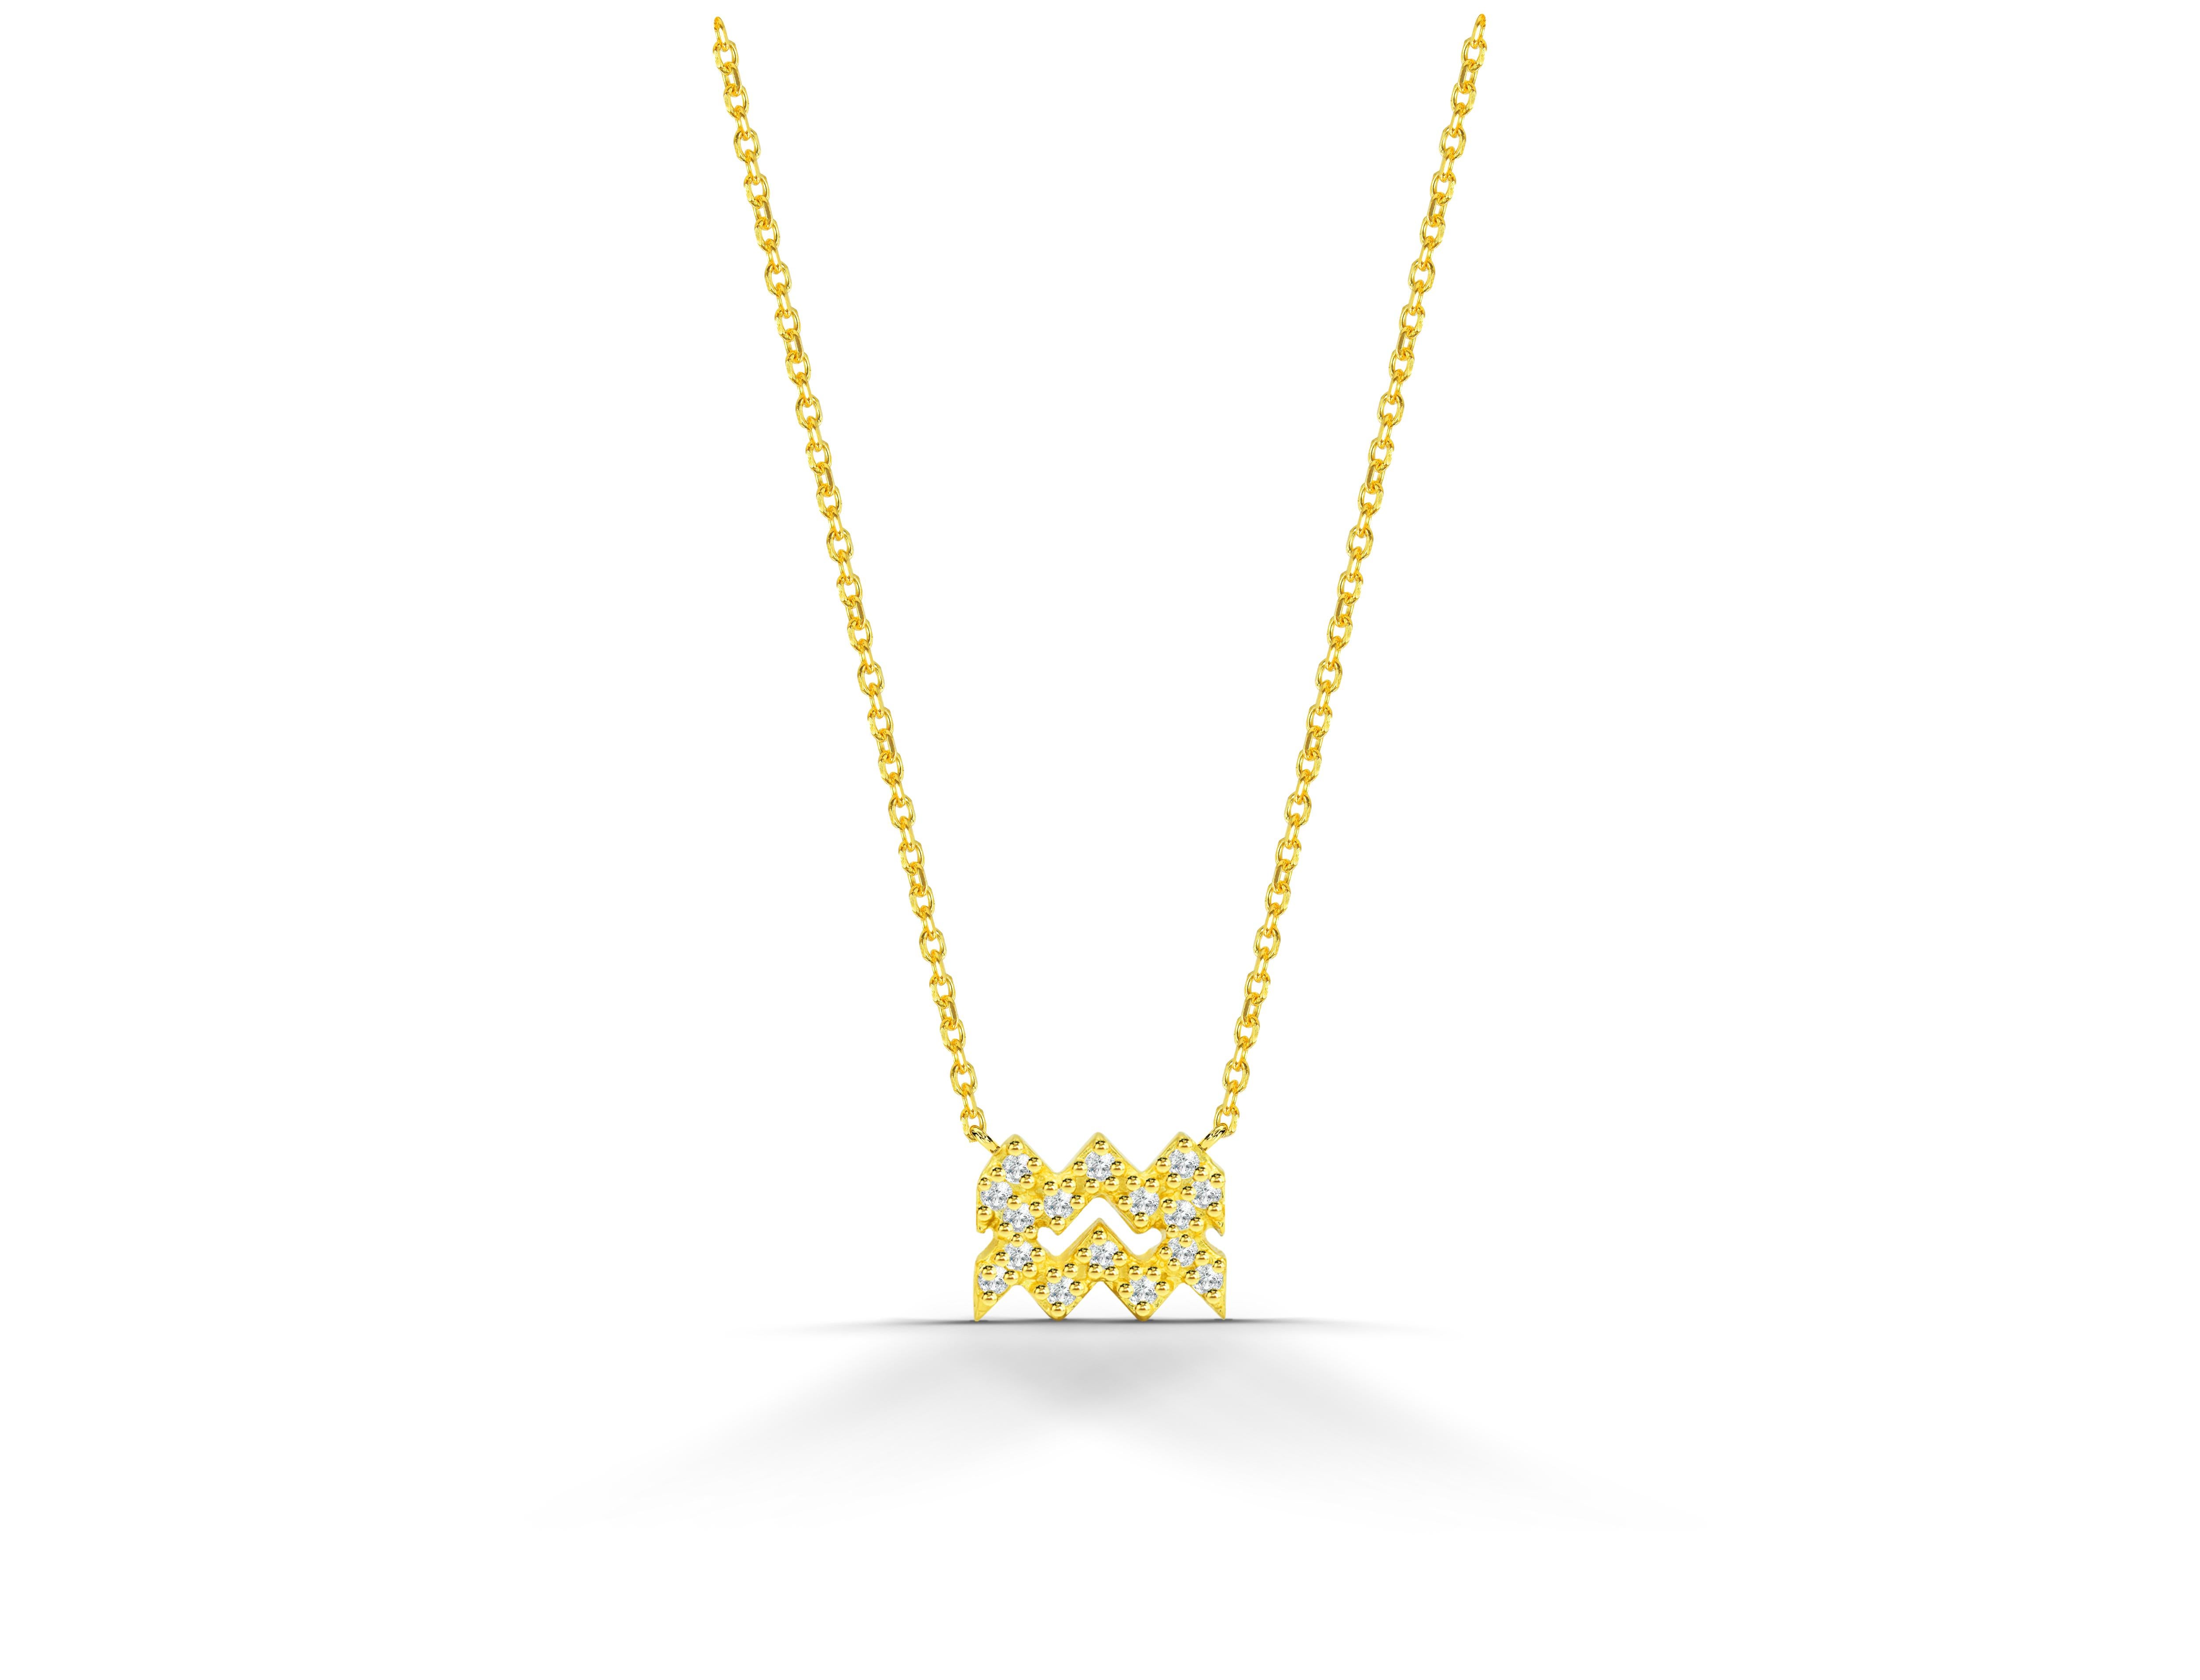 Beautiful and Sparkly Diamond Aquarius Necklace is made of 14k solid gold.
Available in three colors of gold: Yellow Gold / White Gold / Rose Gold.

Natural genuine round cut diamond each diamond is hand selected by me to ensure quality and set by a